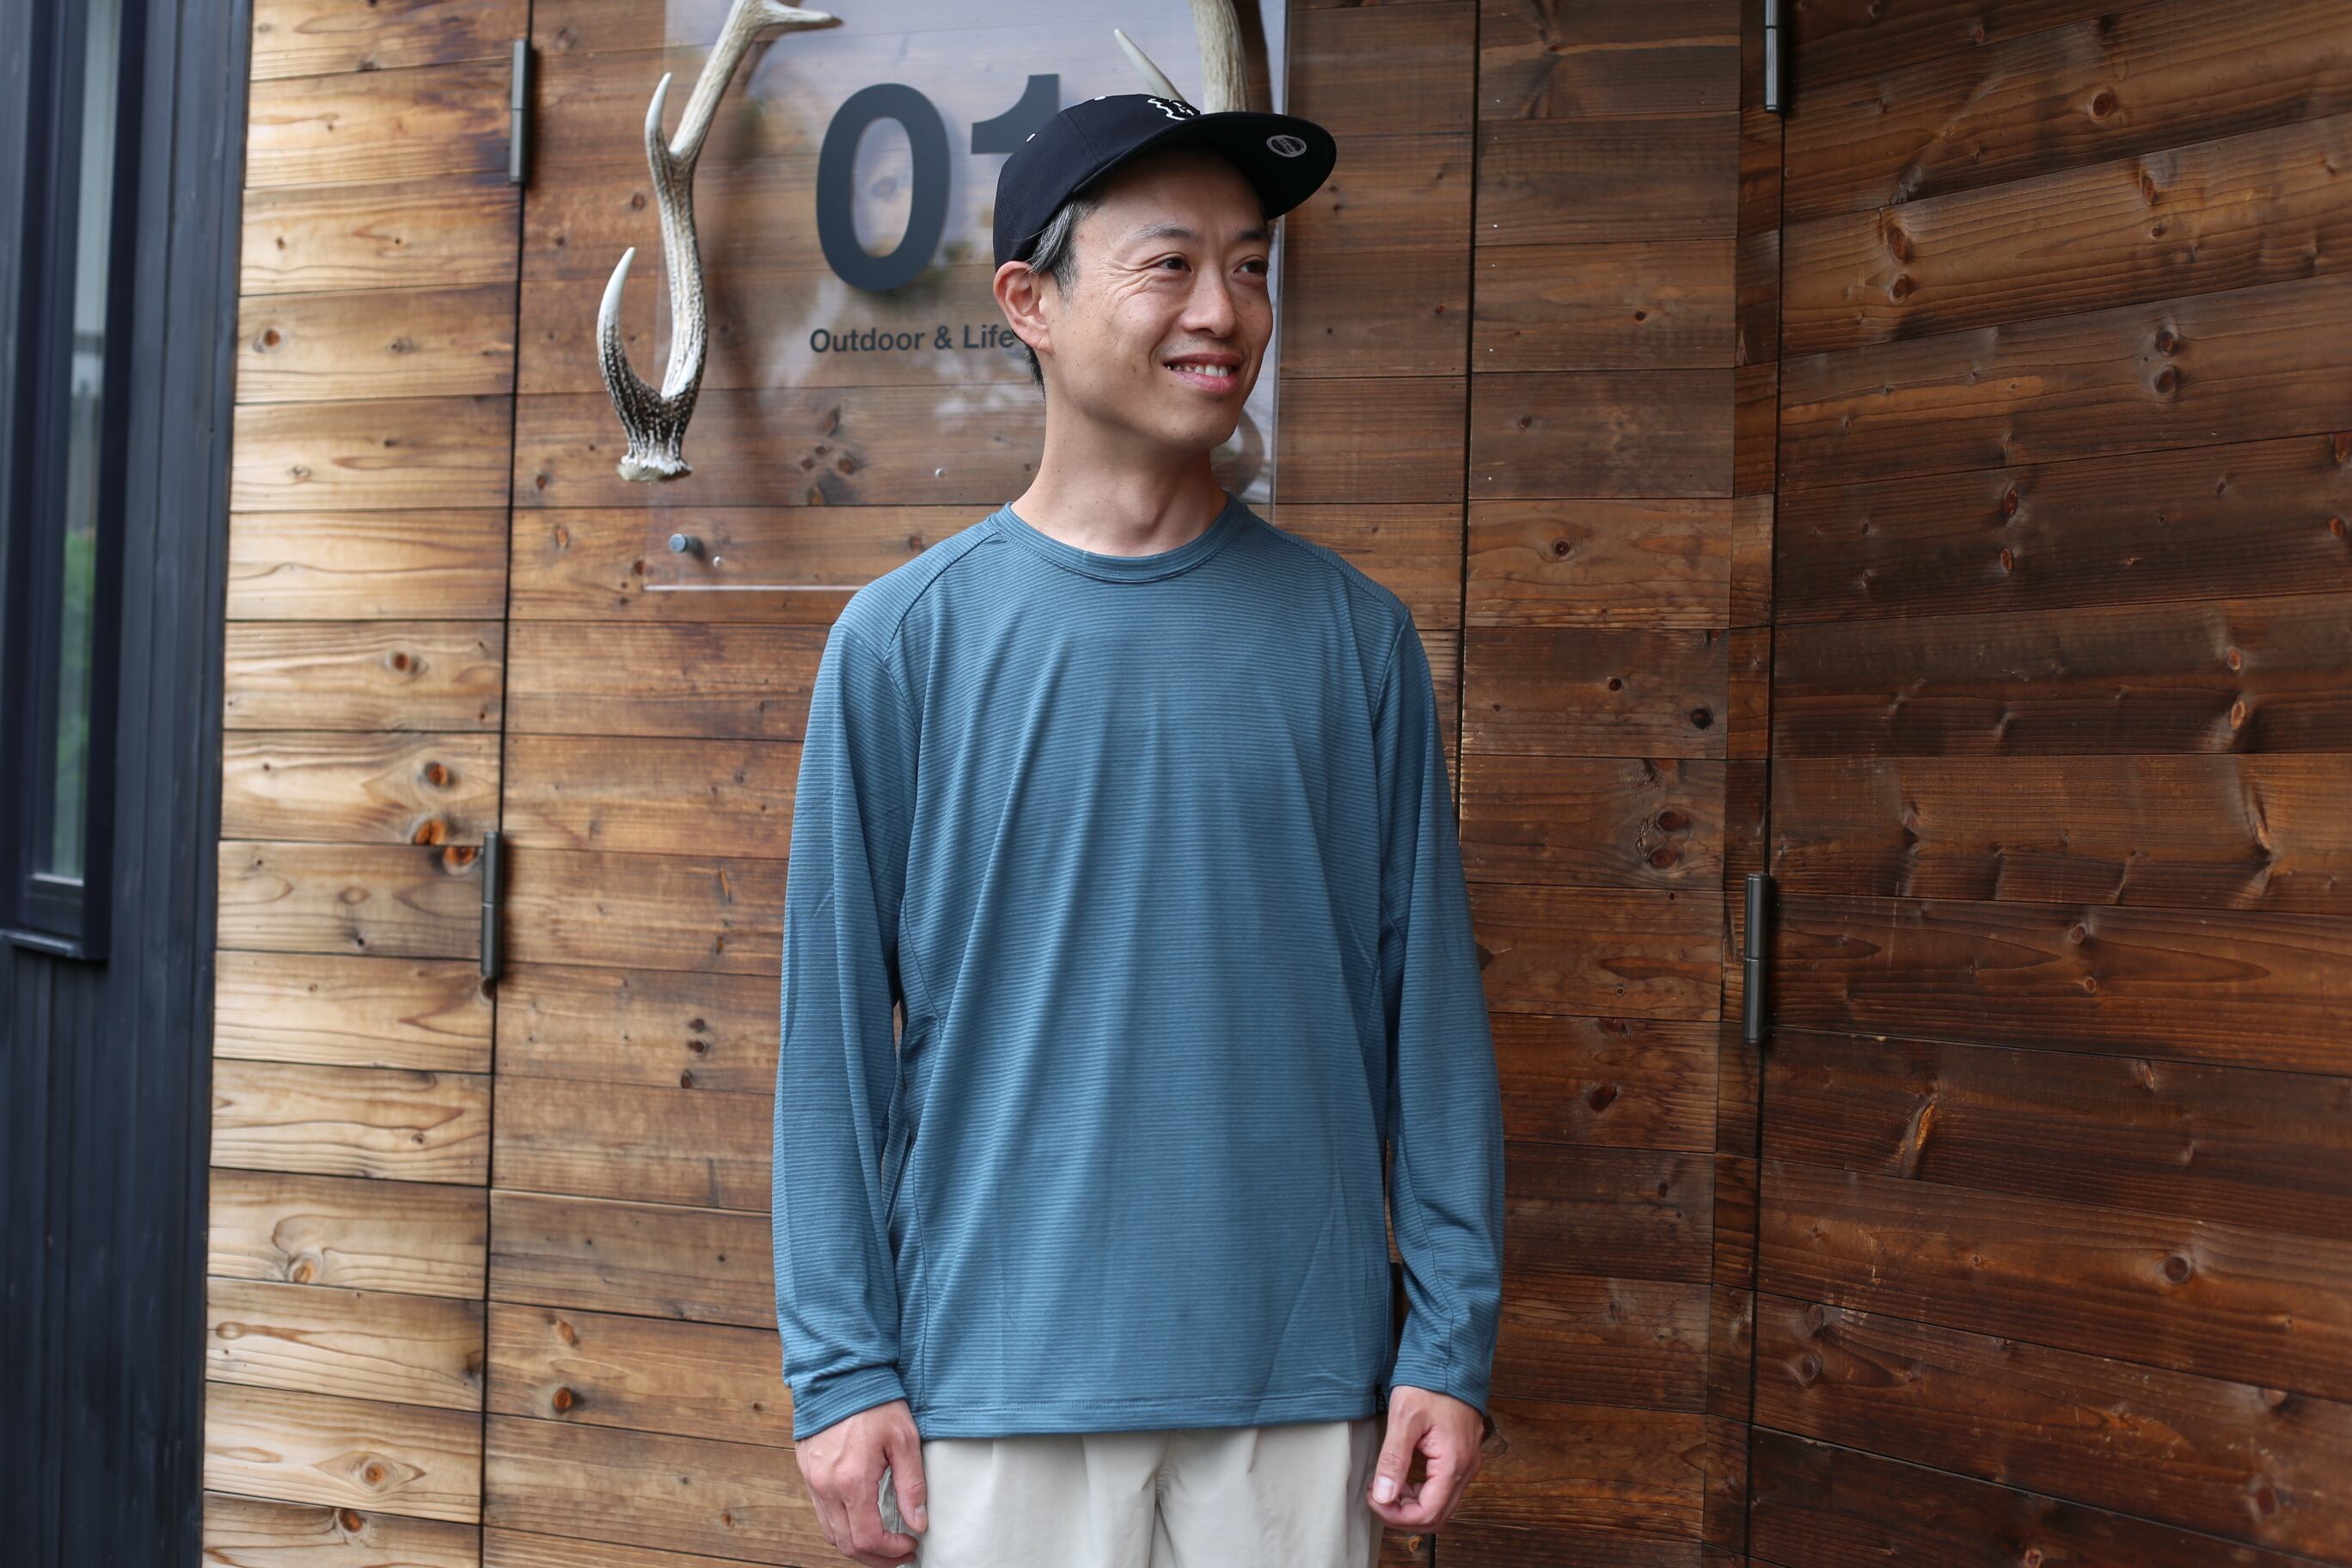 ALL ELEVATION L/S SHIRTS M's 【20%OFF】 | 01. Outdoor & Life Shop